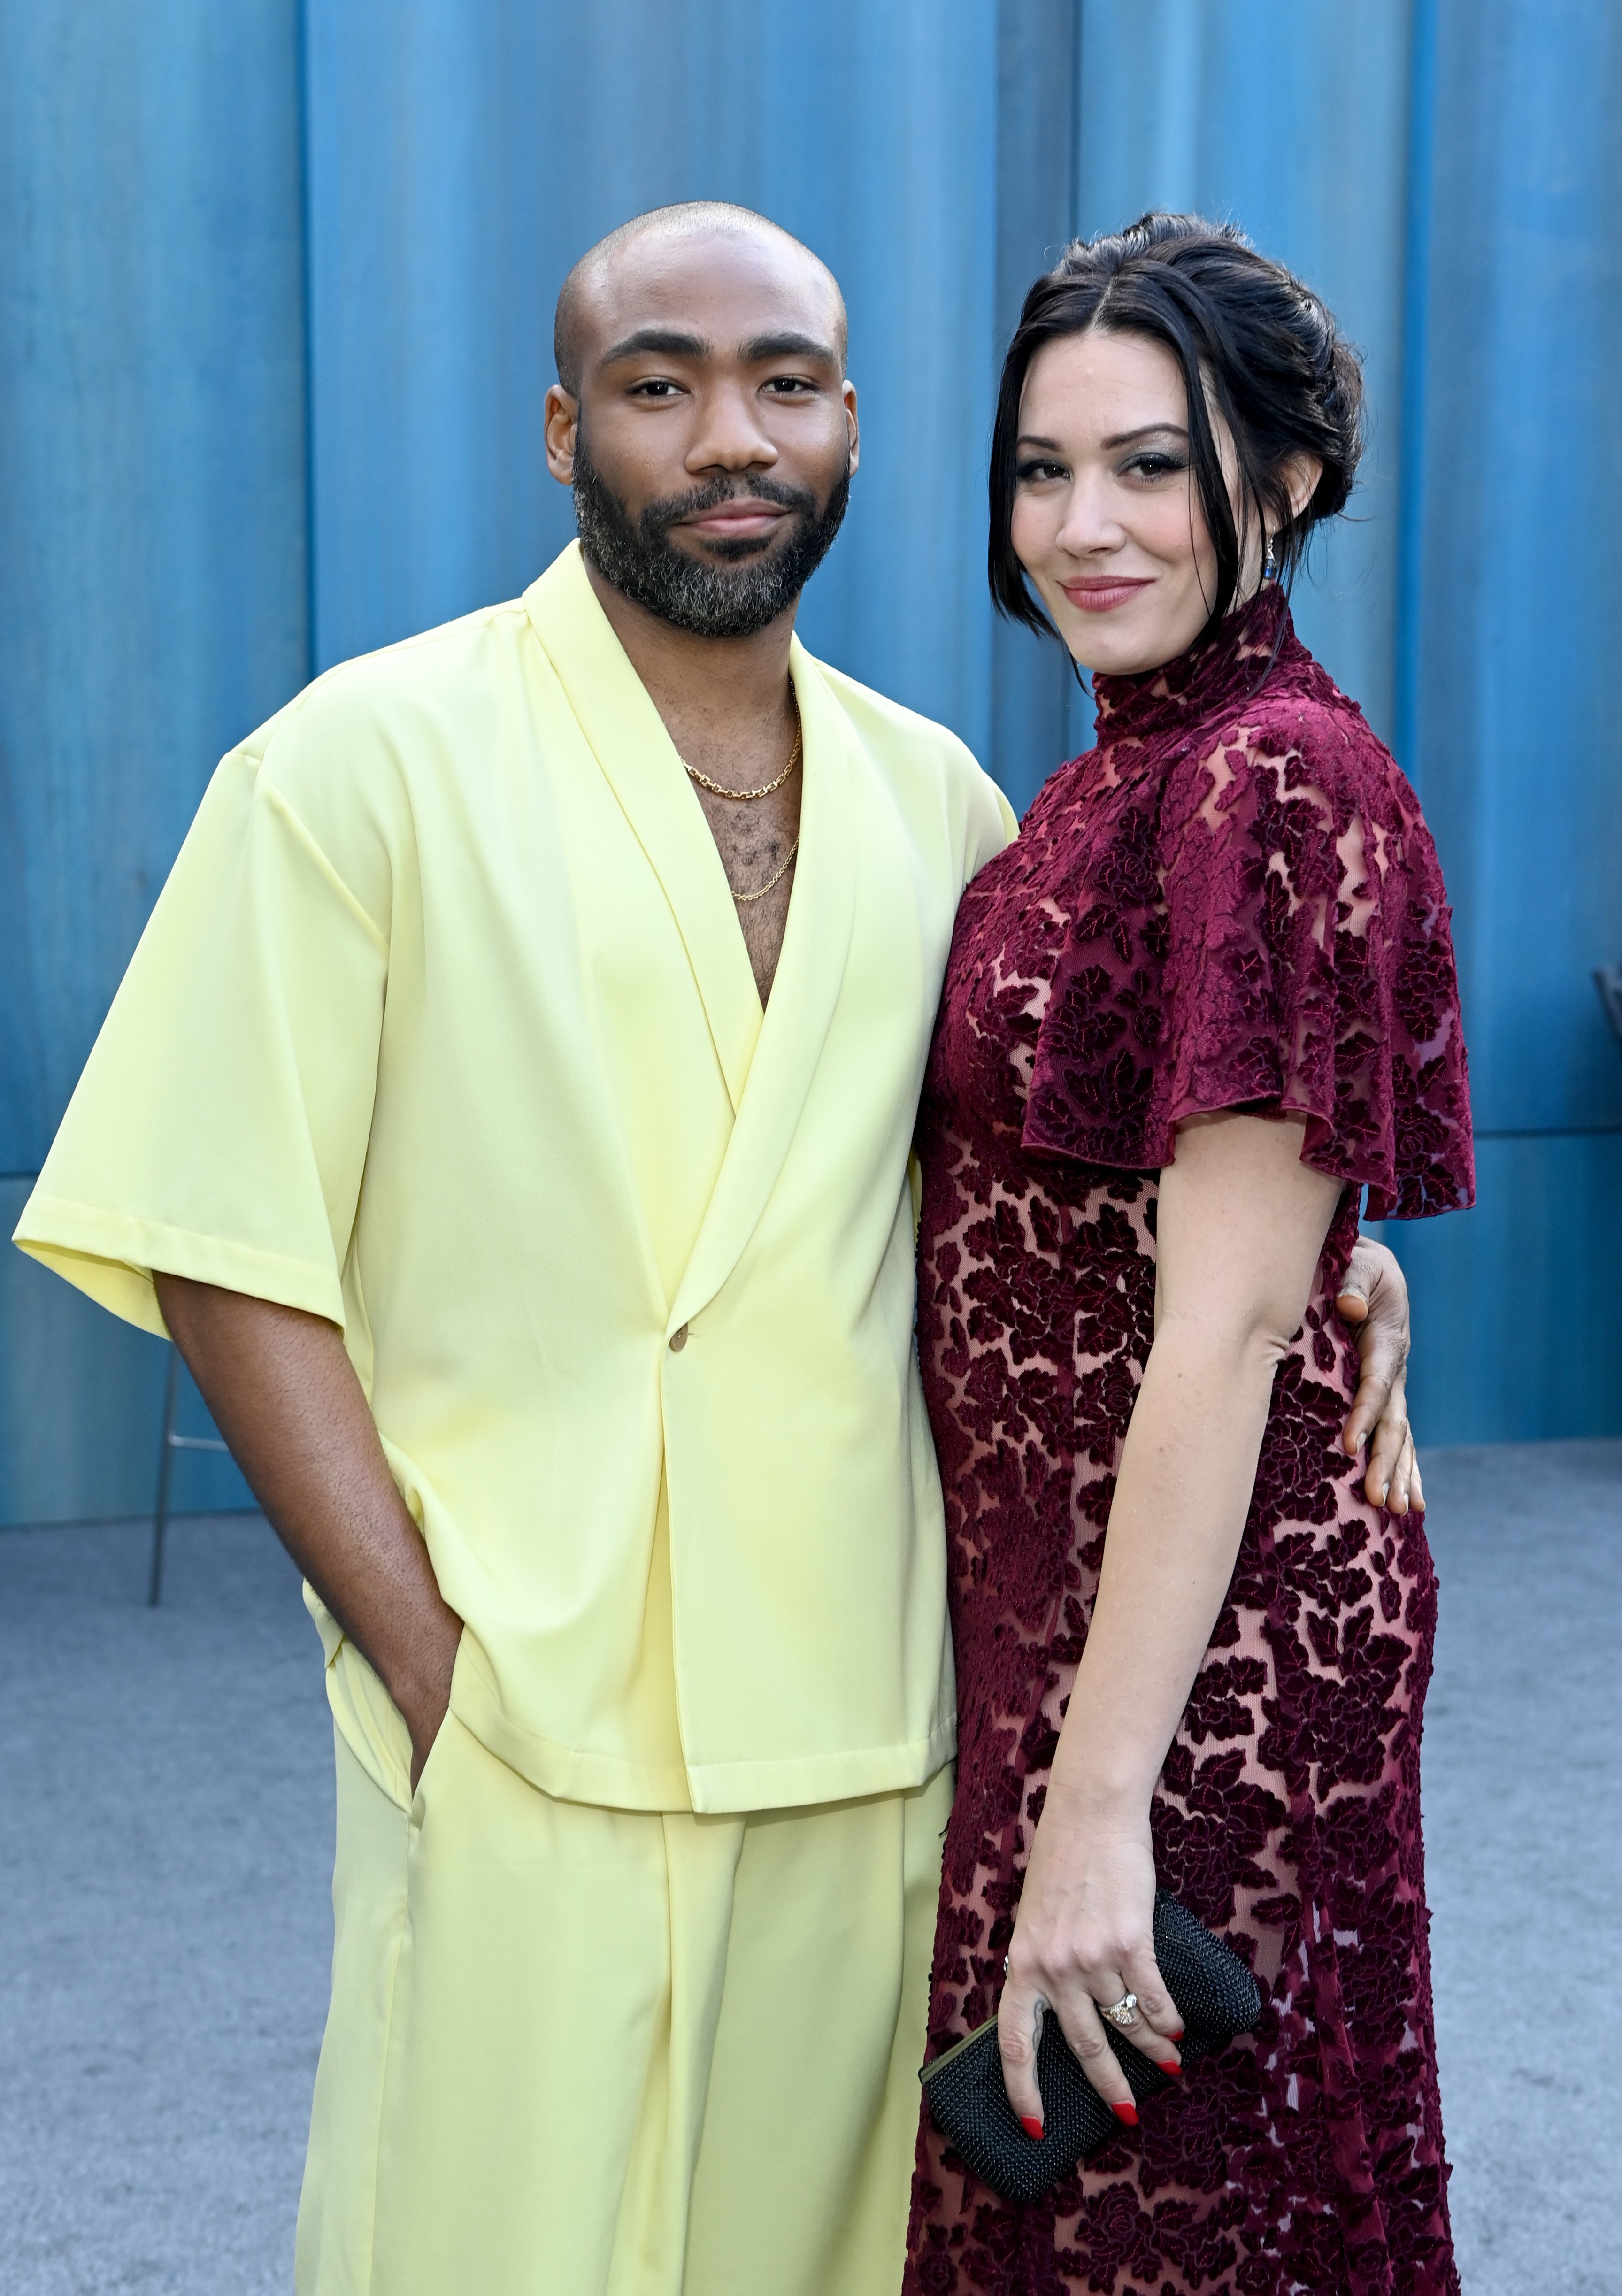 Donald Glover and Michelle White at the Wallis Annenberg Center for the Performing Arts on March 27, 2022 in Beverly Hills, California.  Source: Getty Images